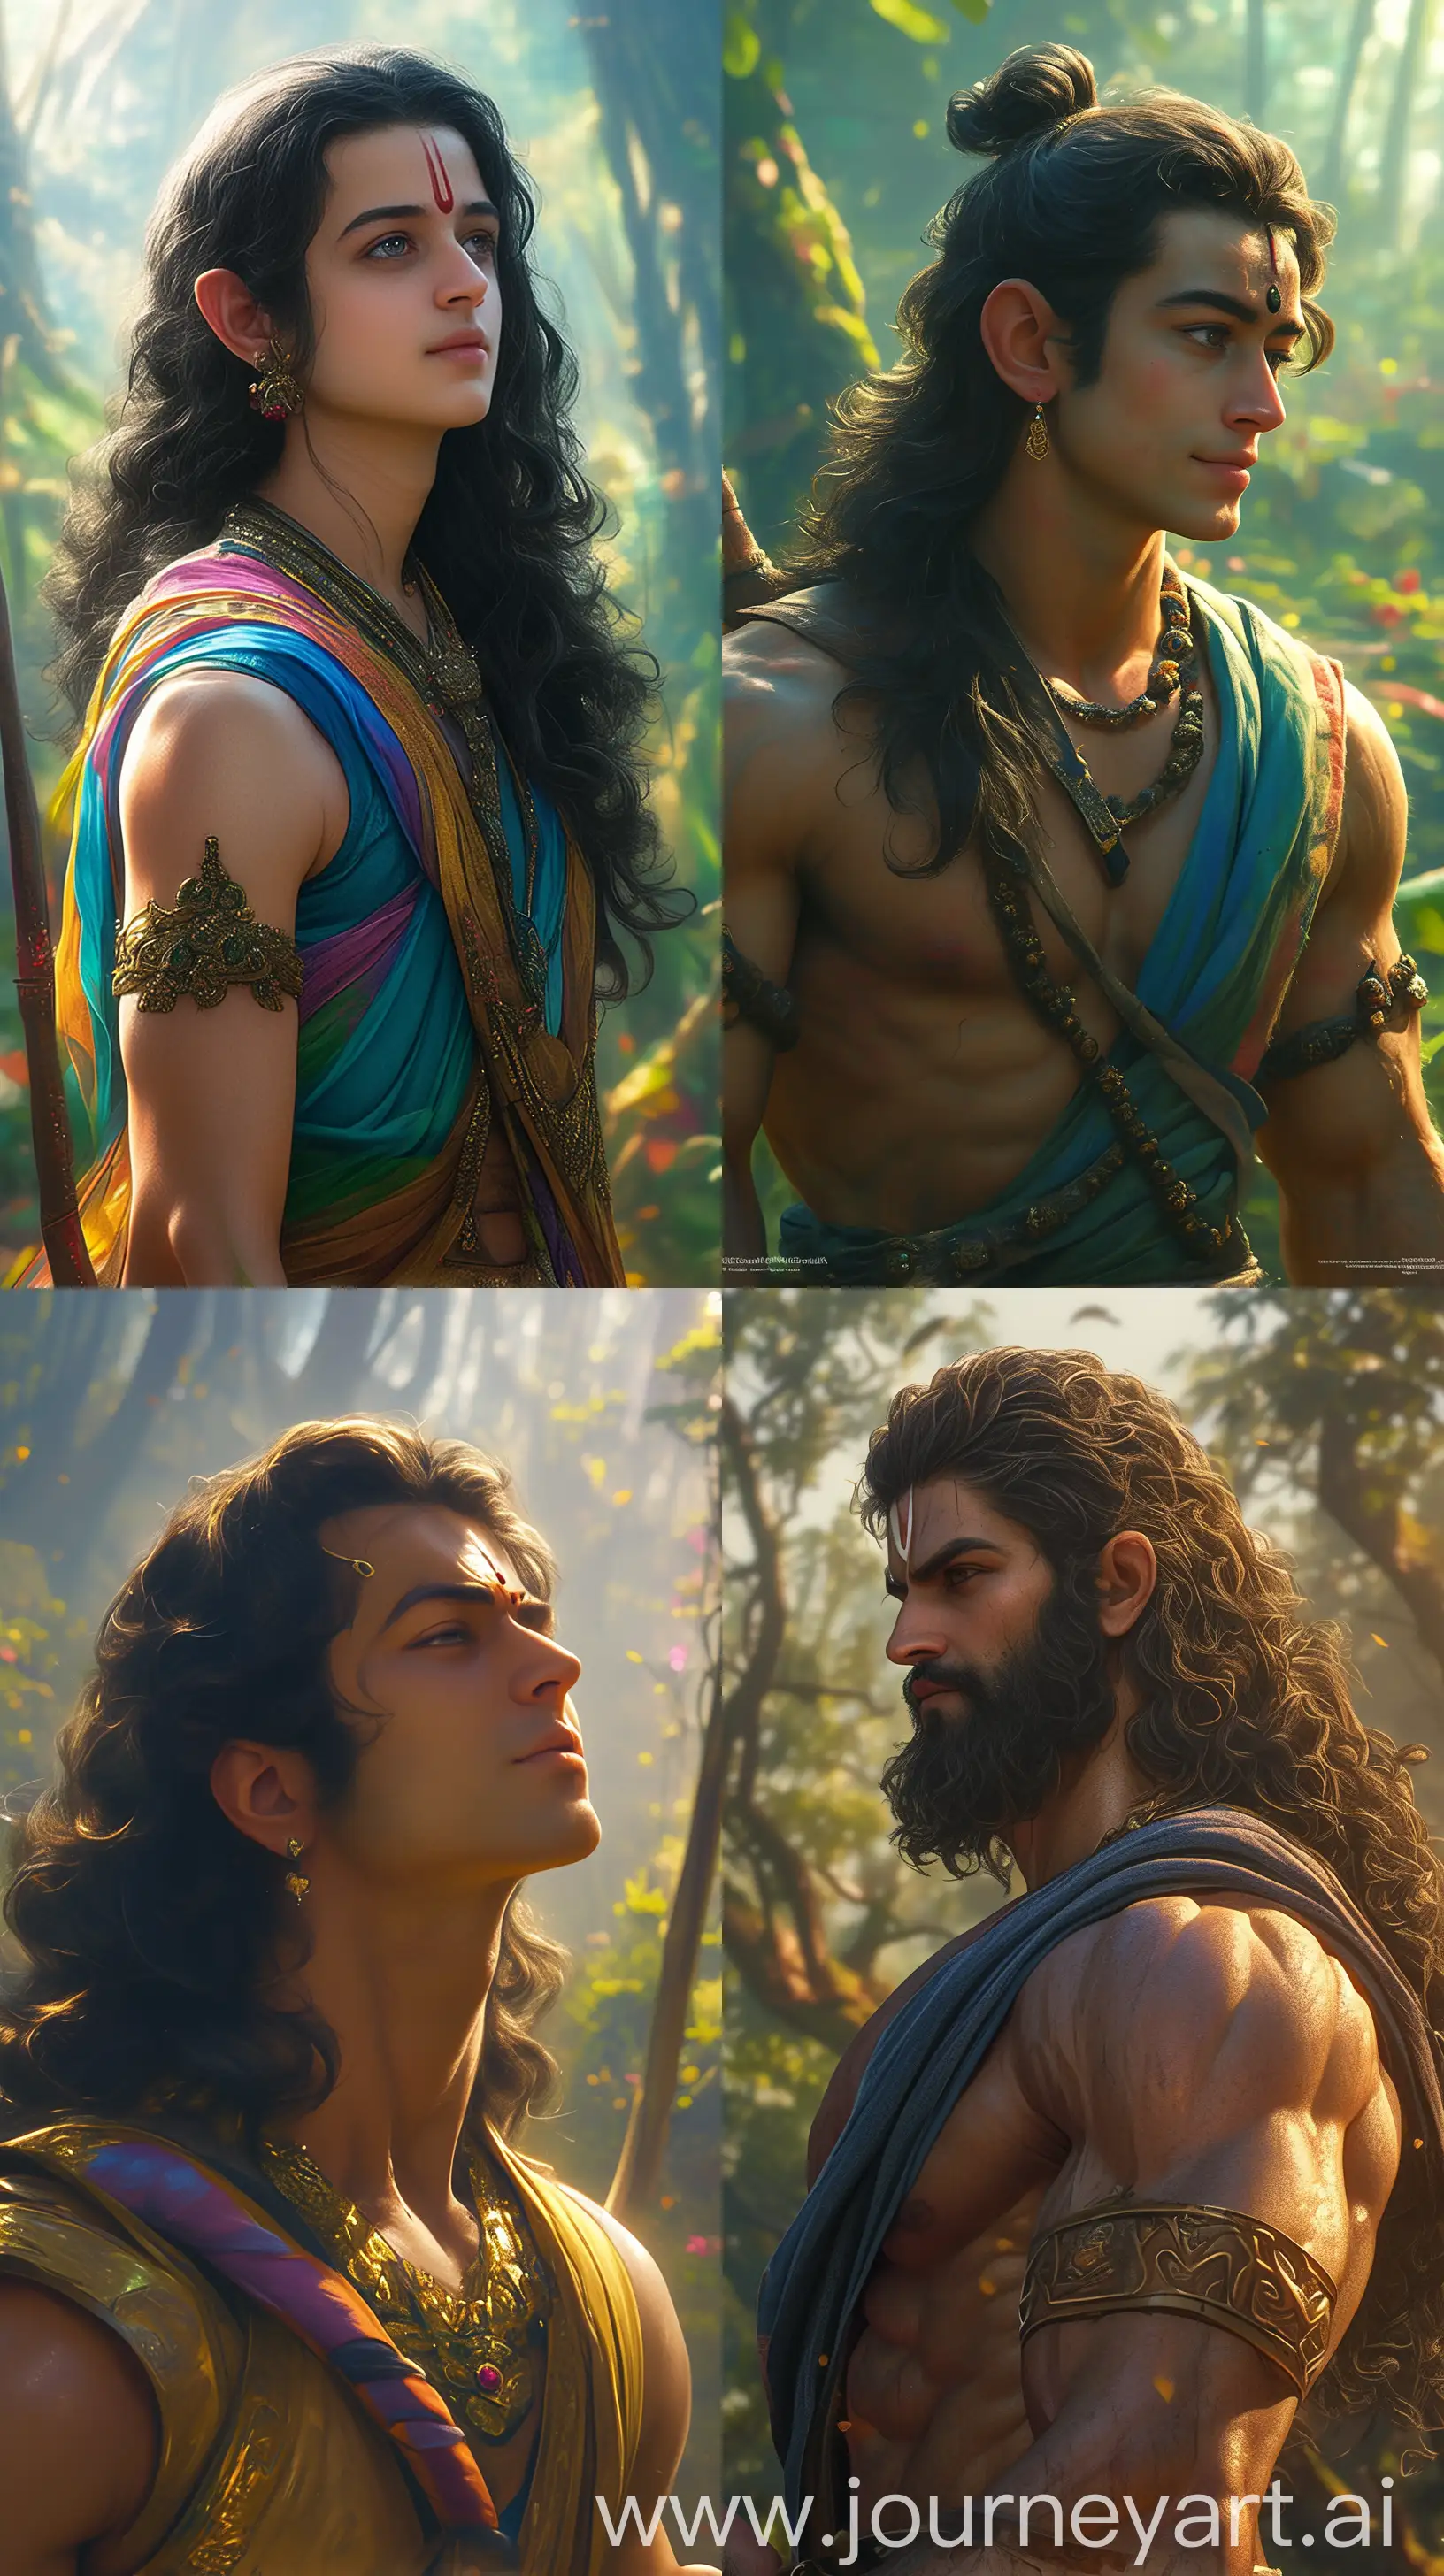 Realistic-Depiction-of-Lord-Ram-Conversing-in-Forest-Setting